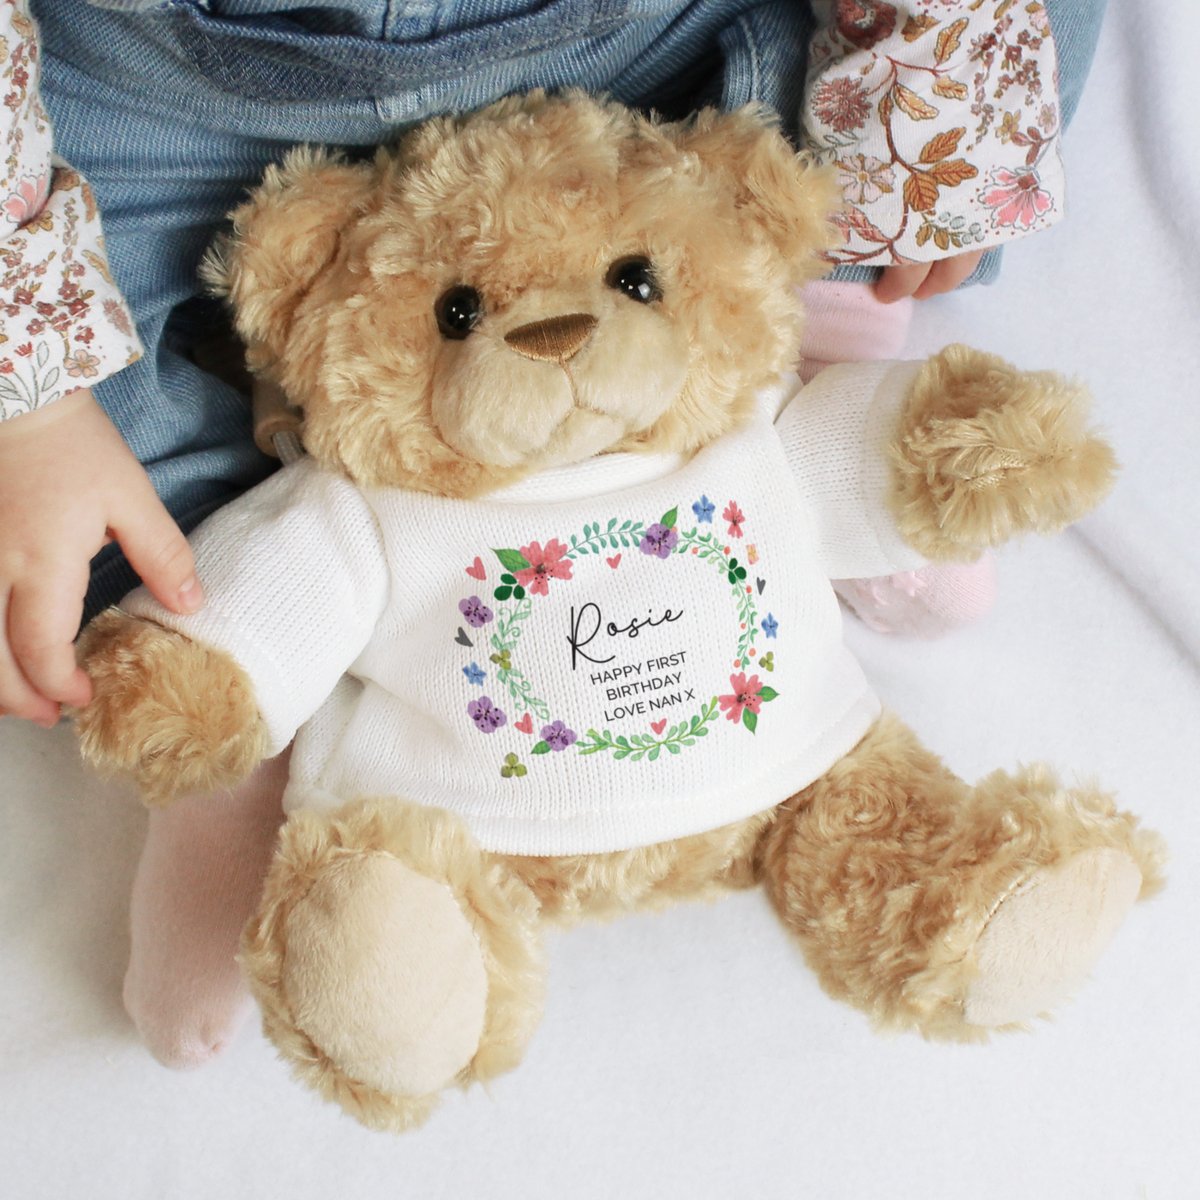 Cuddle ready, this cute teddy bear can be personalised with any name & message on it's jumper lilybluestore.com/products/perso…

#earlybiz #mhhsbd #elevenseshour #giftideas